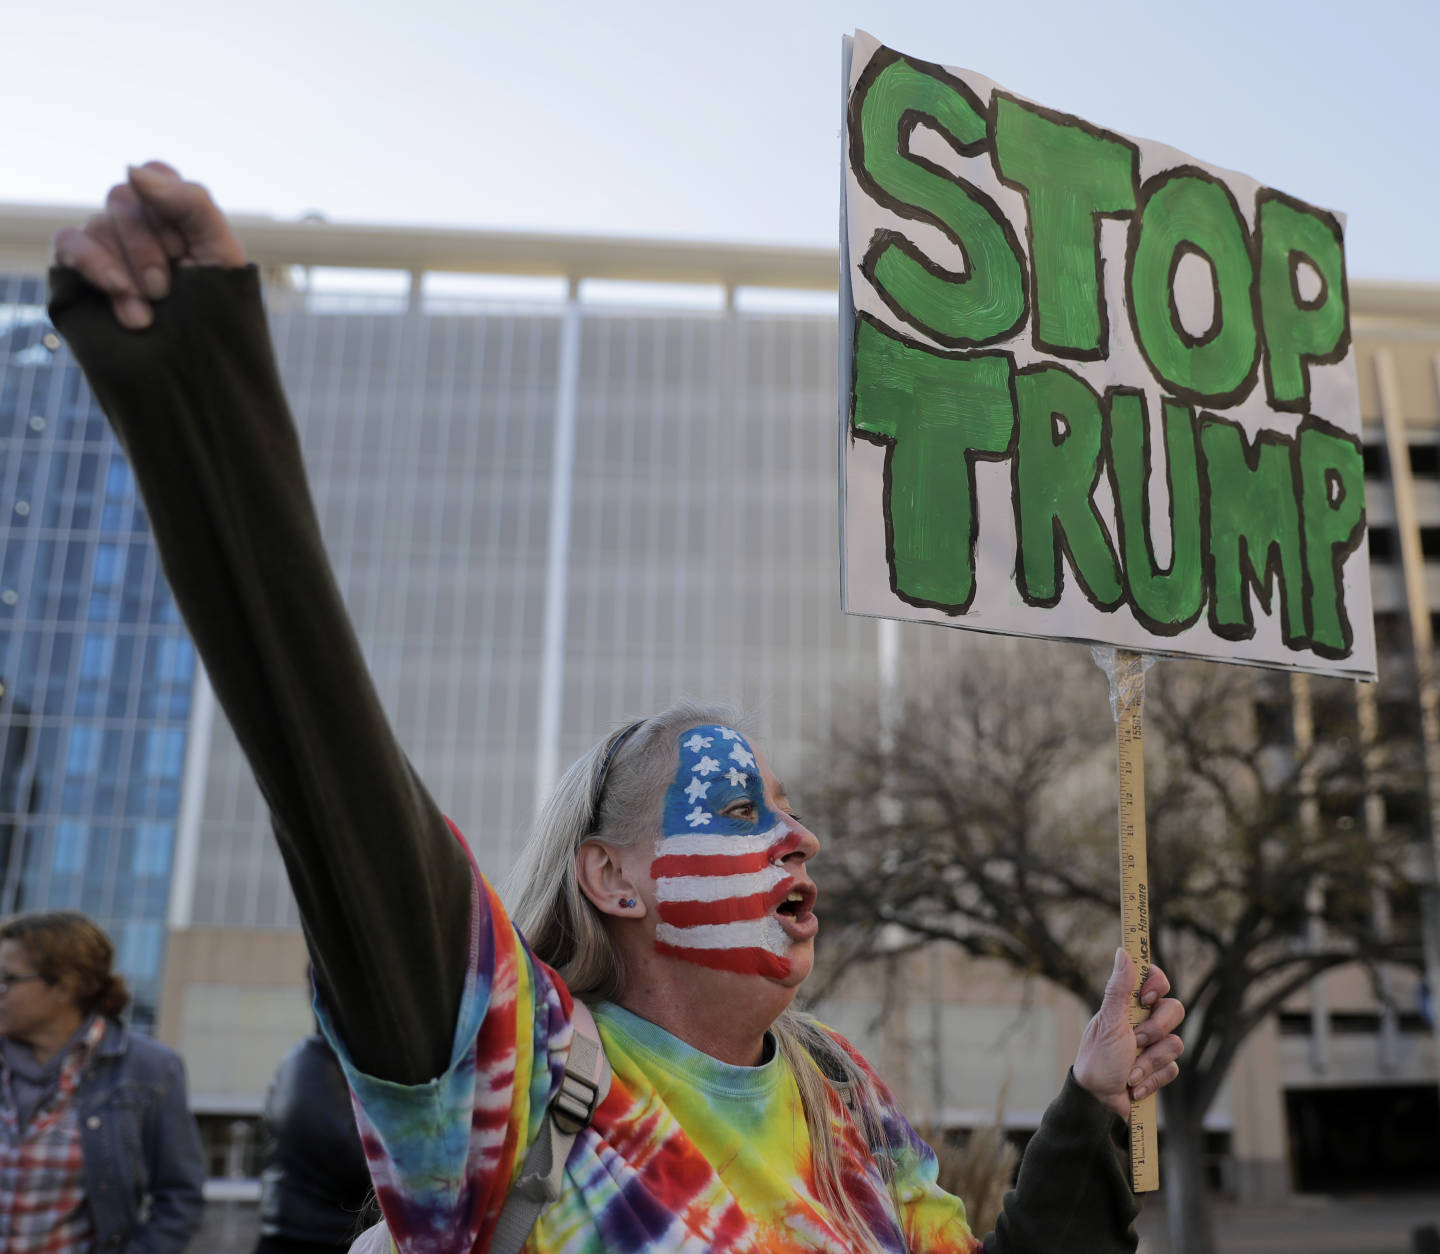 Mary Johnson protests against the election of President-elect Donald Trump Saturday, Nov. 12, 2016, in front of City Hall in Kansas City, Mo. (AP Photo/Charlie Riedel)